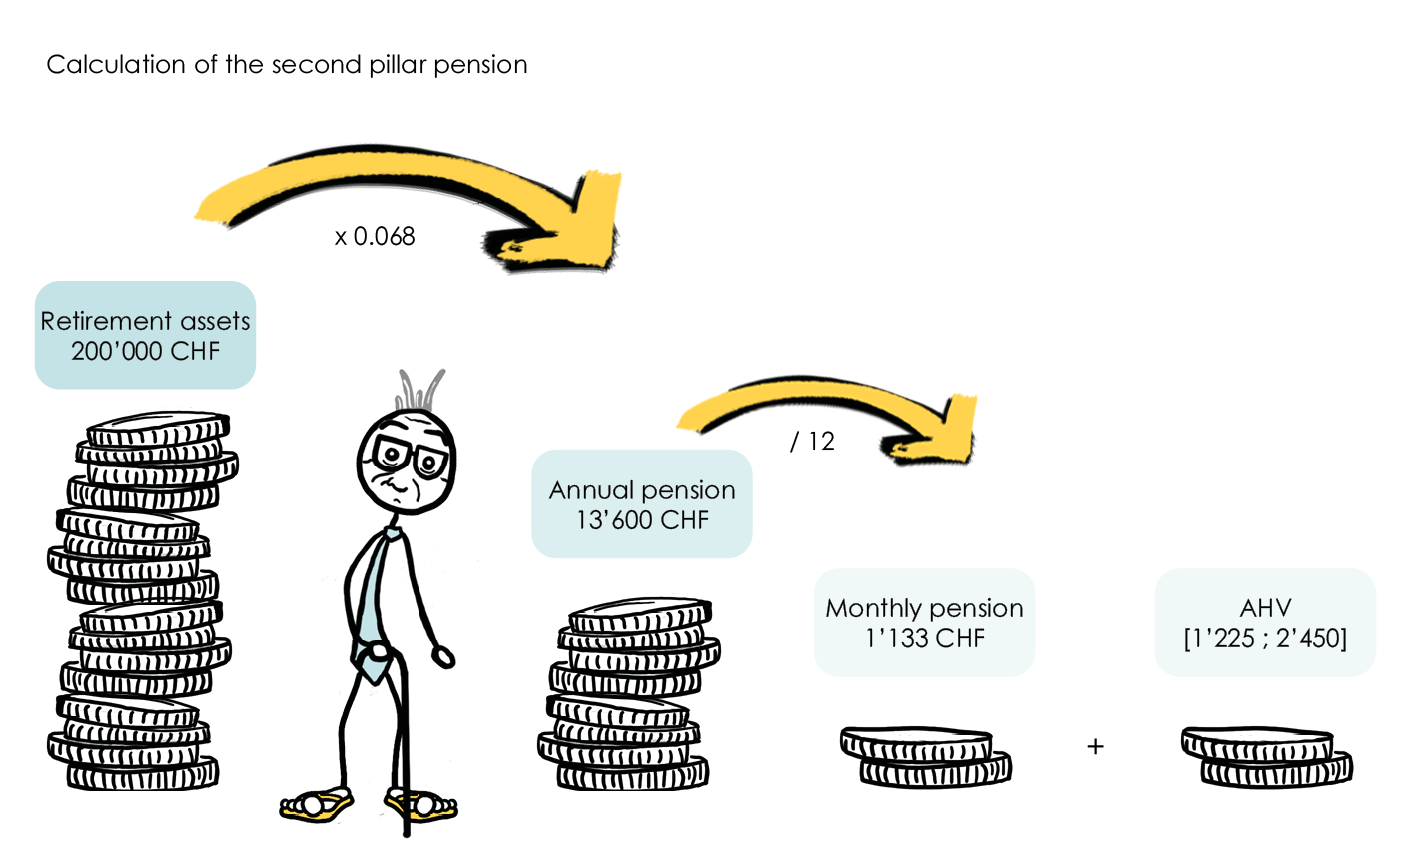 Diagram of the steps involved in calculating a BVG/LPP 2nd pillar pension